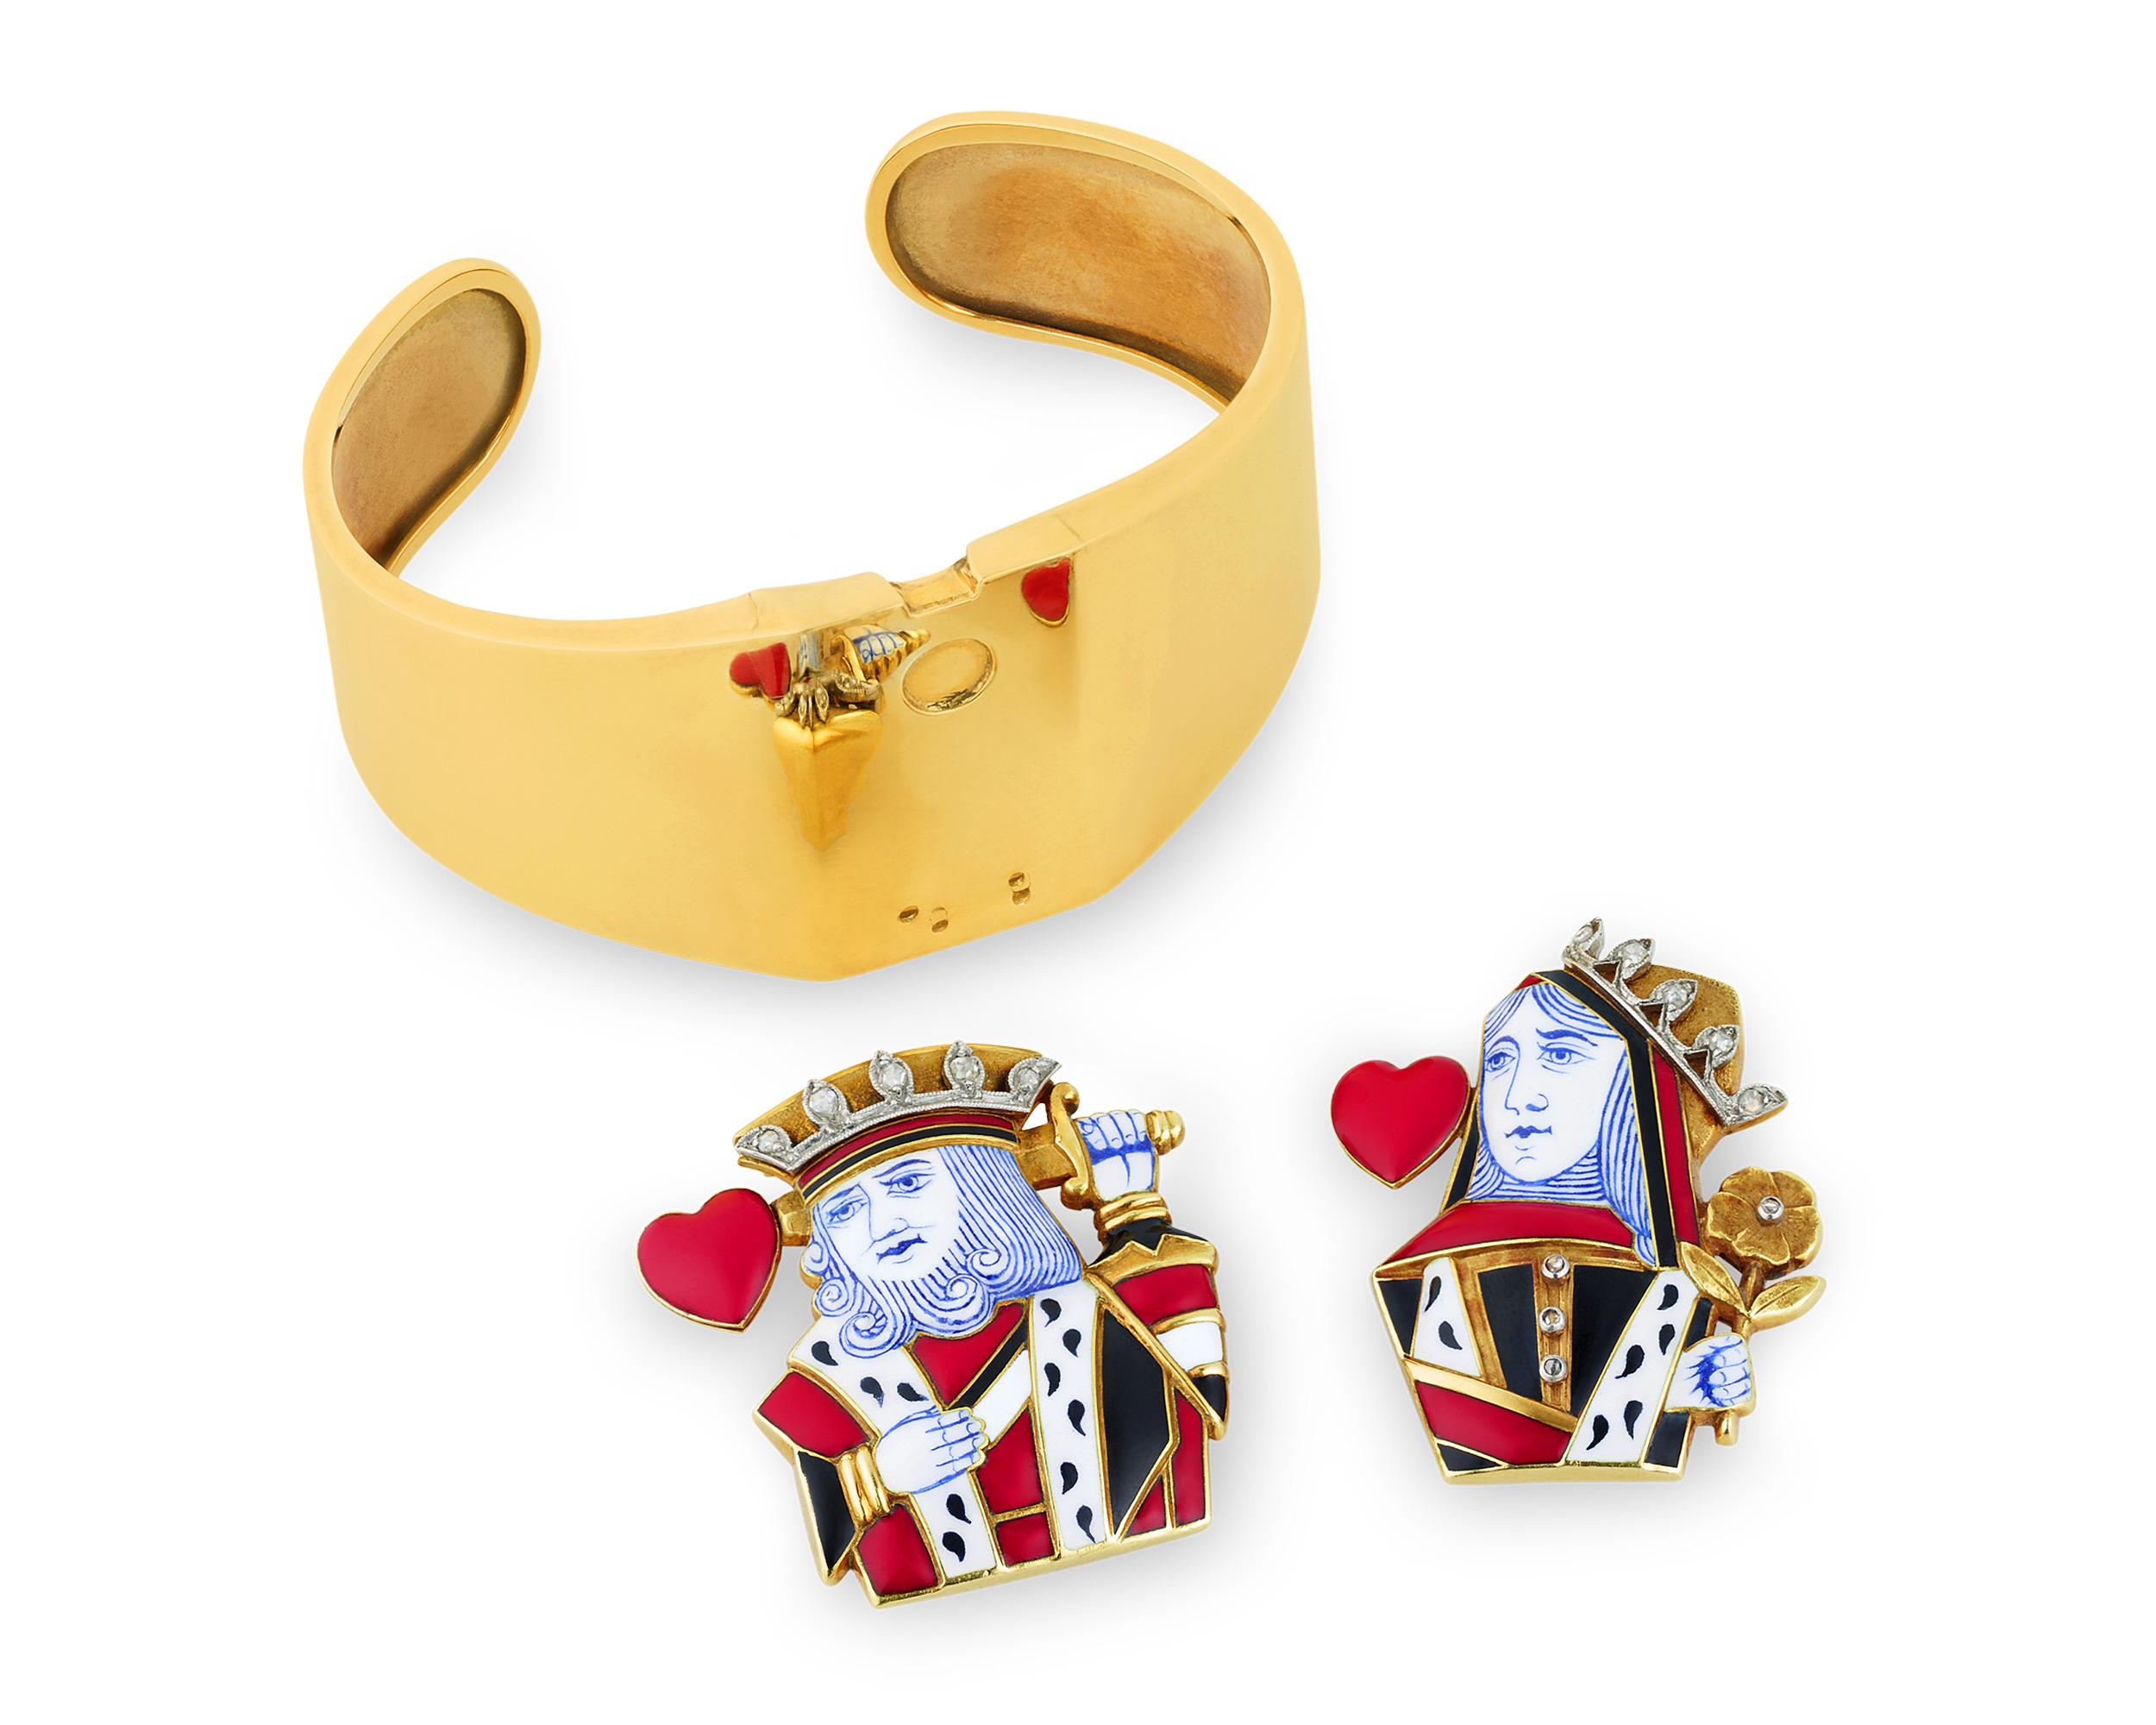 Exuding the decadence of a bygone era, this pair of playing card clip brooches hail from the revered French jeweler Cartier. Each pin is crafted of red, white, blue and black enamel to form the iconic designs of the Queen and King of Hearts, and the